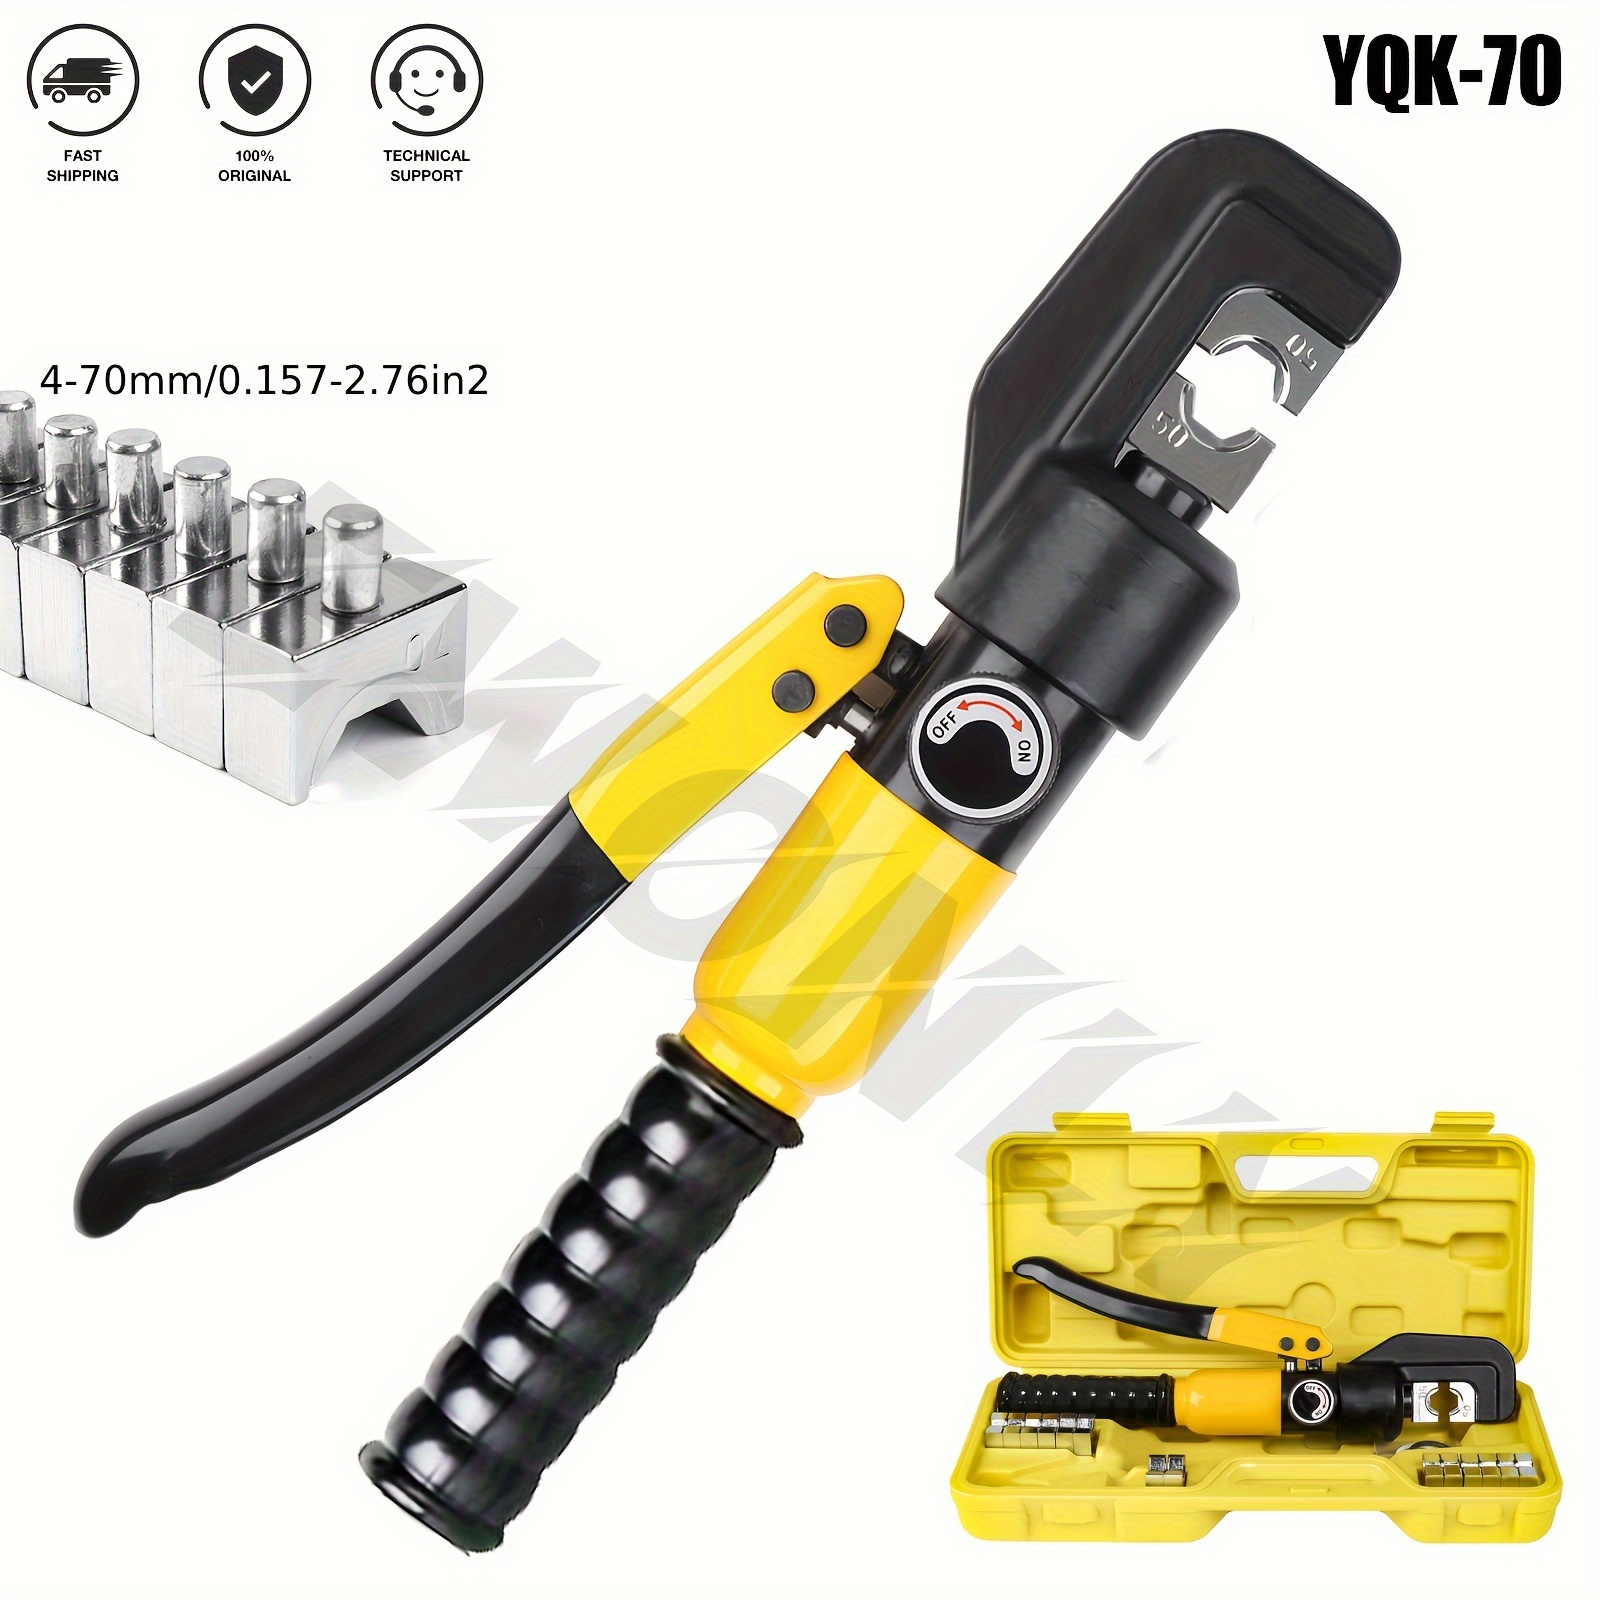 

1pc Yqk-70 Alloy Steel Hydraulic Crimper Kit, 4-70mm² Hex Mold Set, Professional Hydraulic Crimping Tool Set With 8 Hexagonal Dies, Adjustable Valve & Carry Case